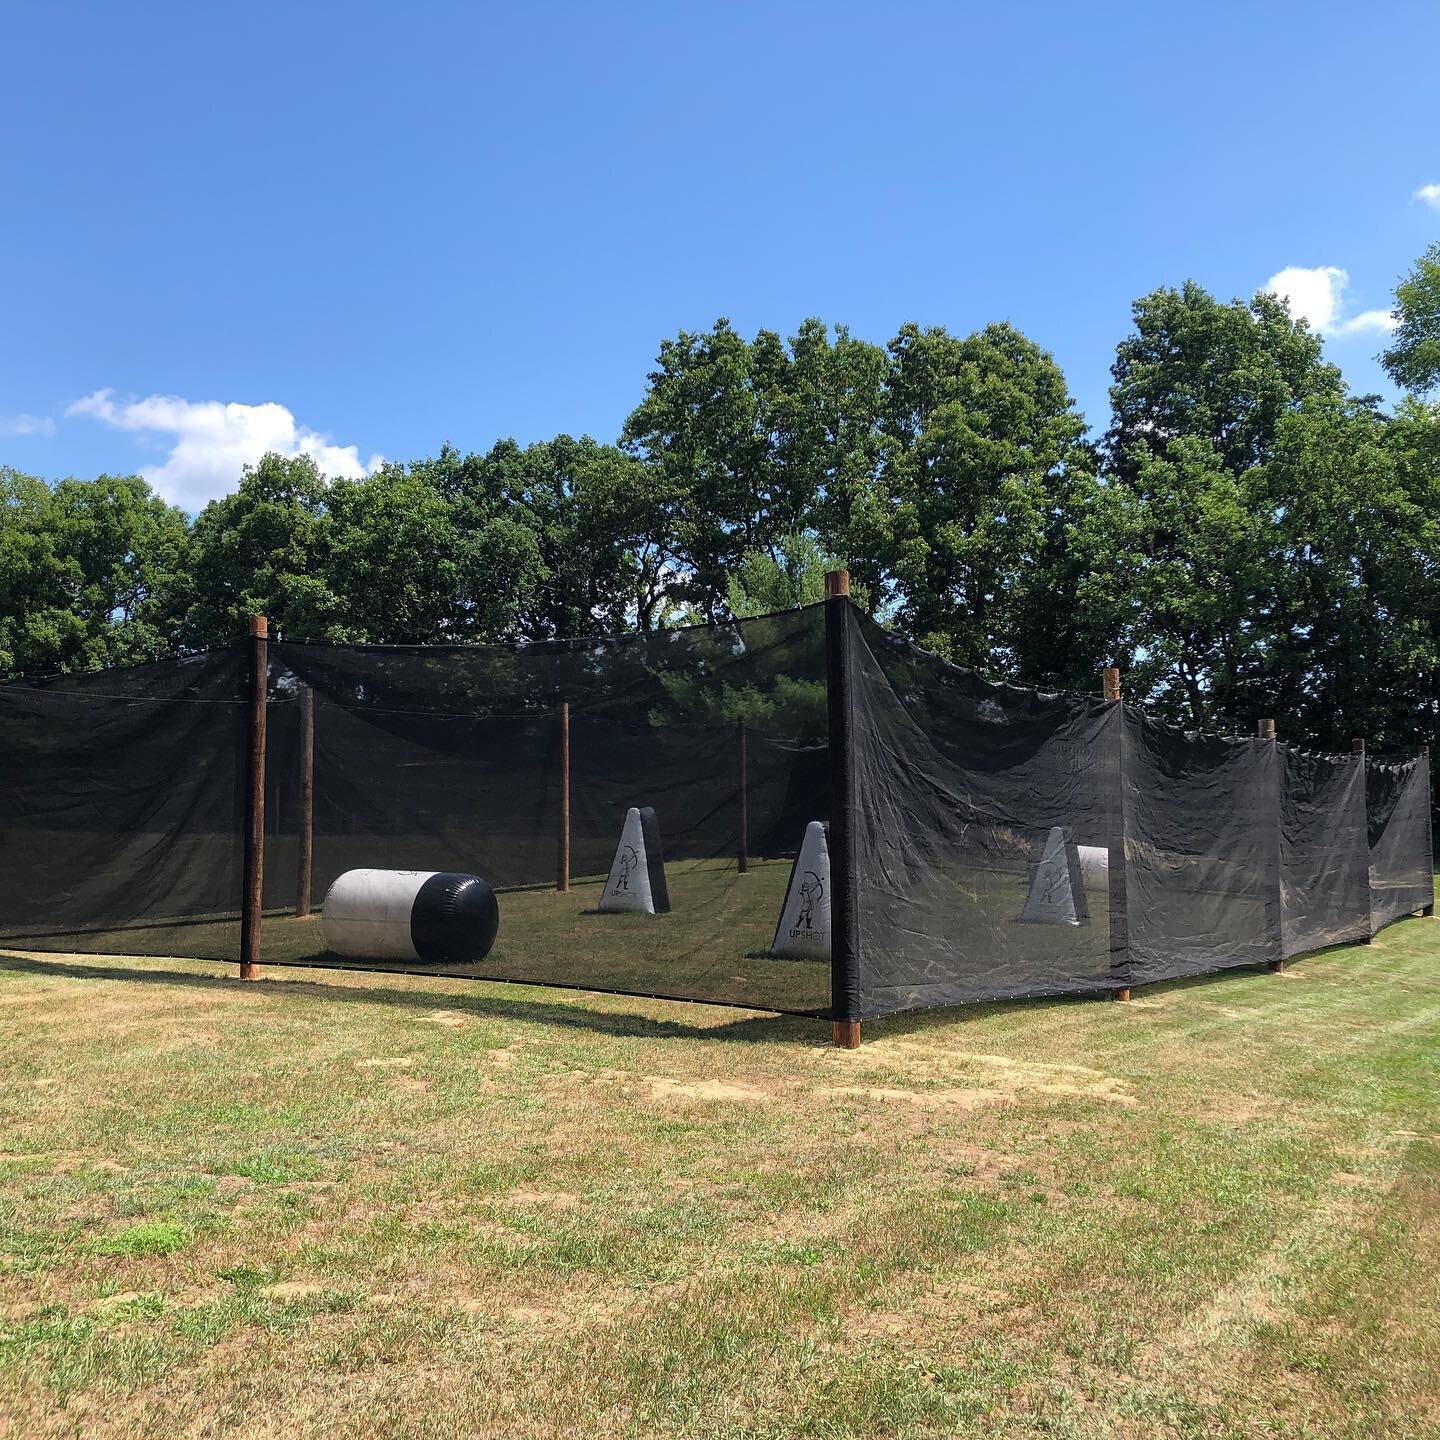 Our Archery Tag Arena is Neato Completo! We love seeing progress at camp, just in time too for Teen Extreme! #ArcheryTagArena #ThroughTheWaters #CampLife